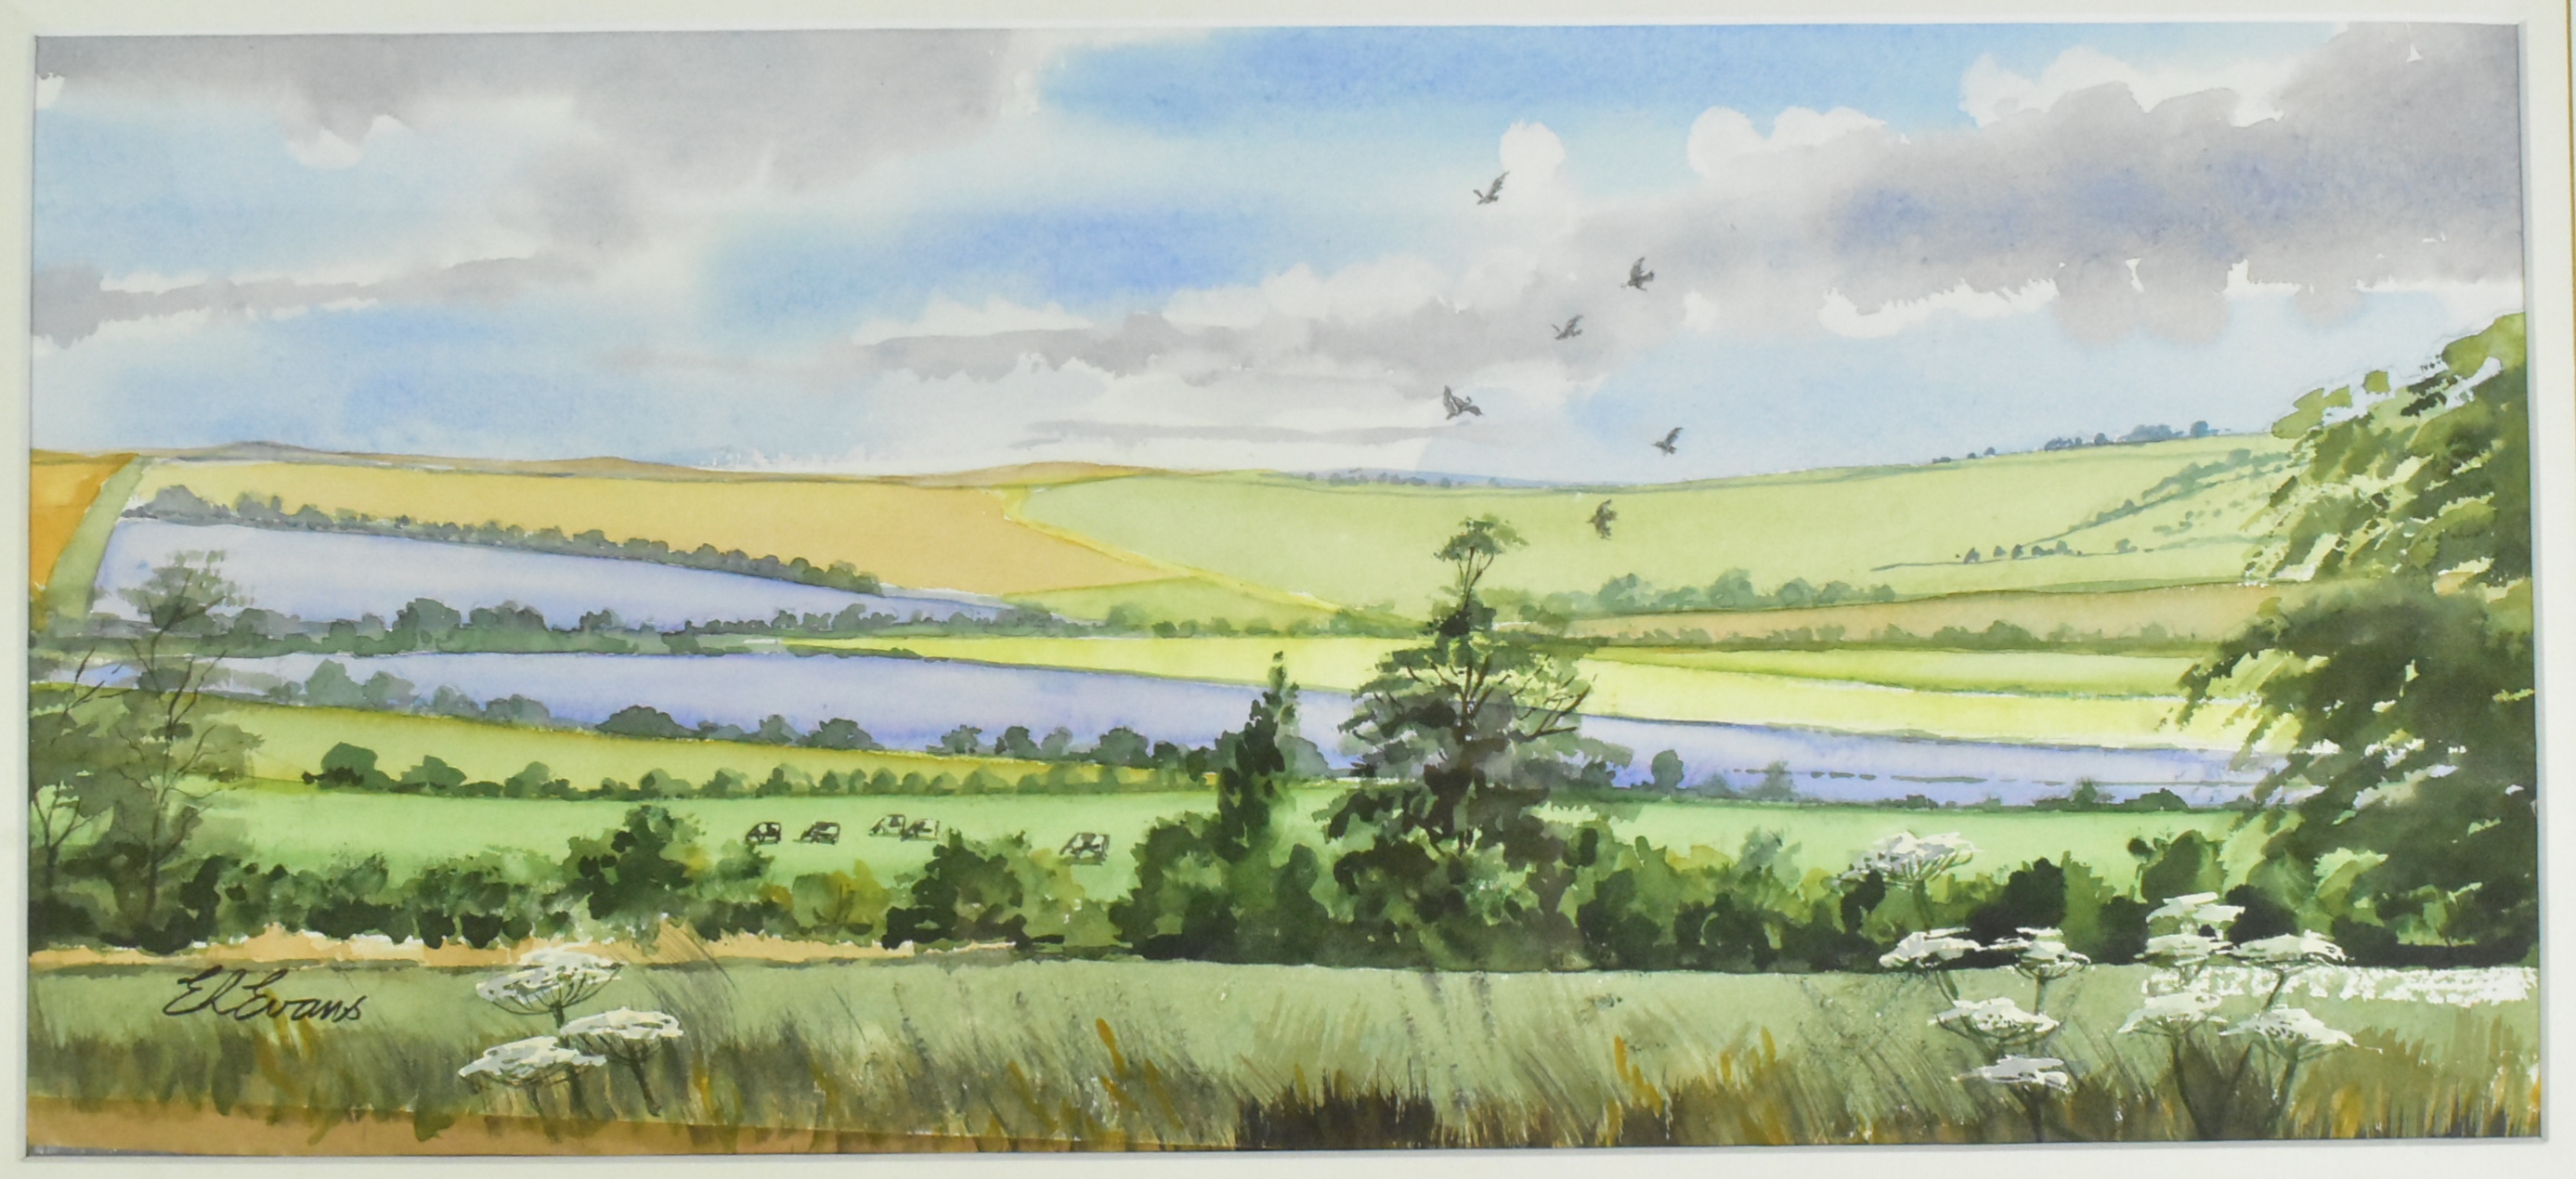 THREE PIECES OF ARTWORK RELATING TO SOUTH WEST LANDSCAPES - Image 2 of 4